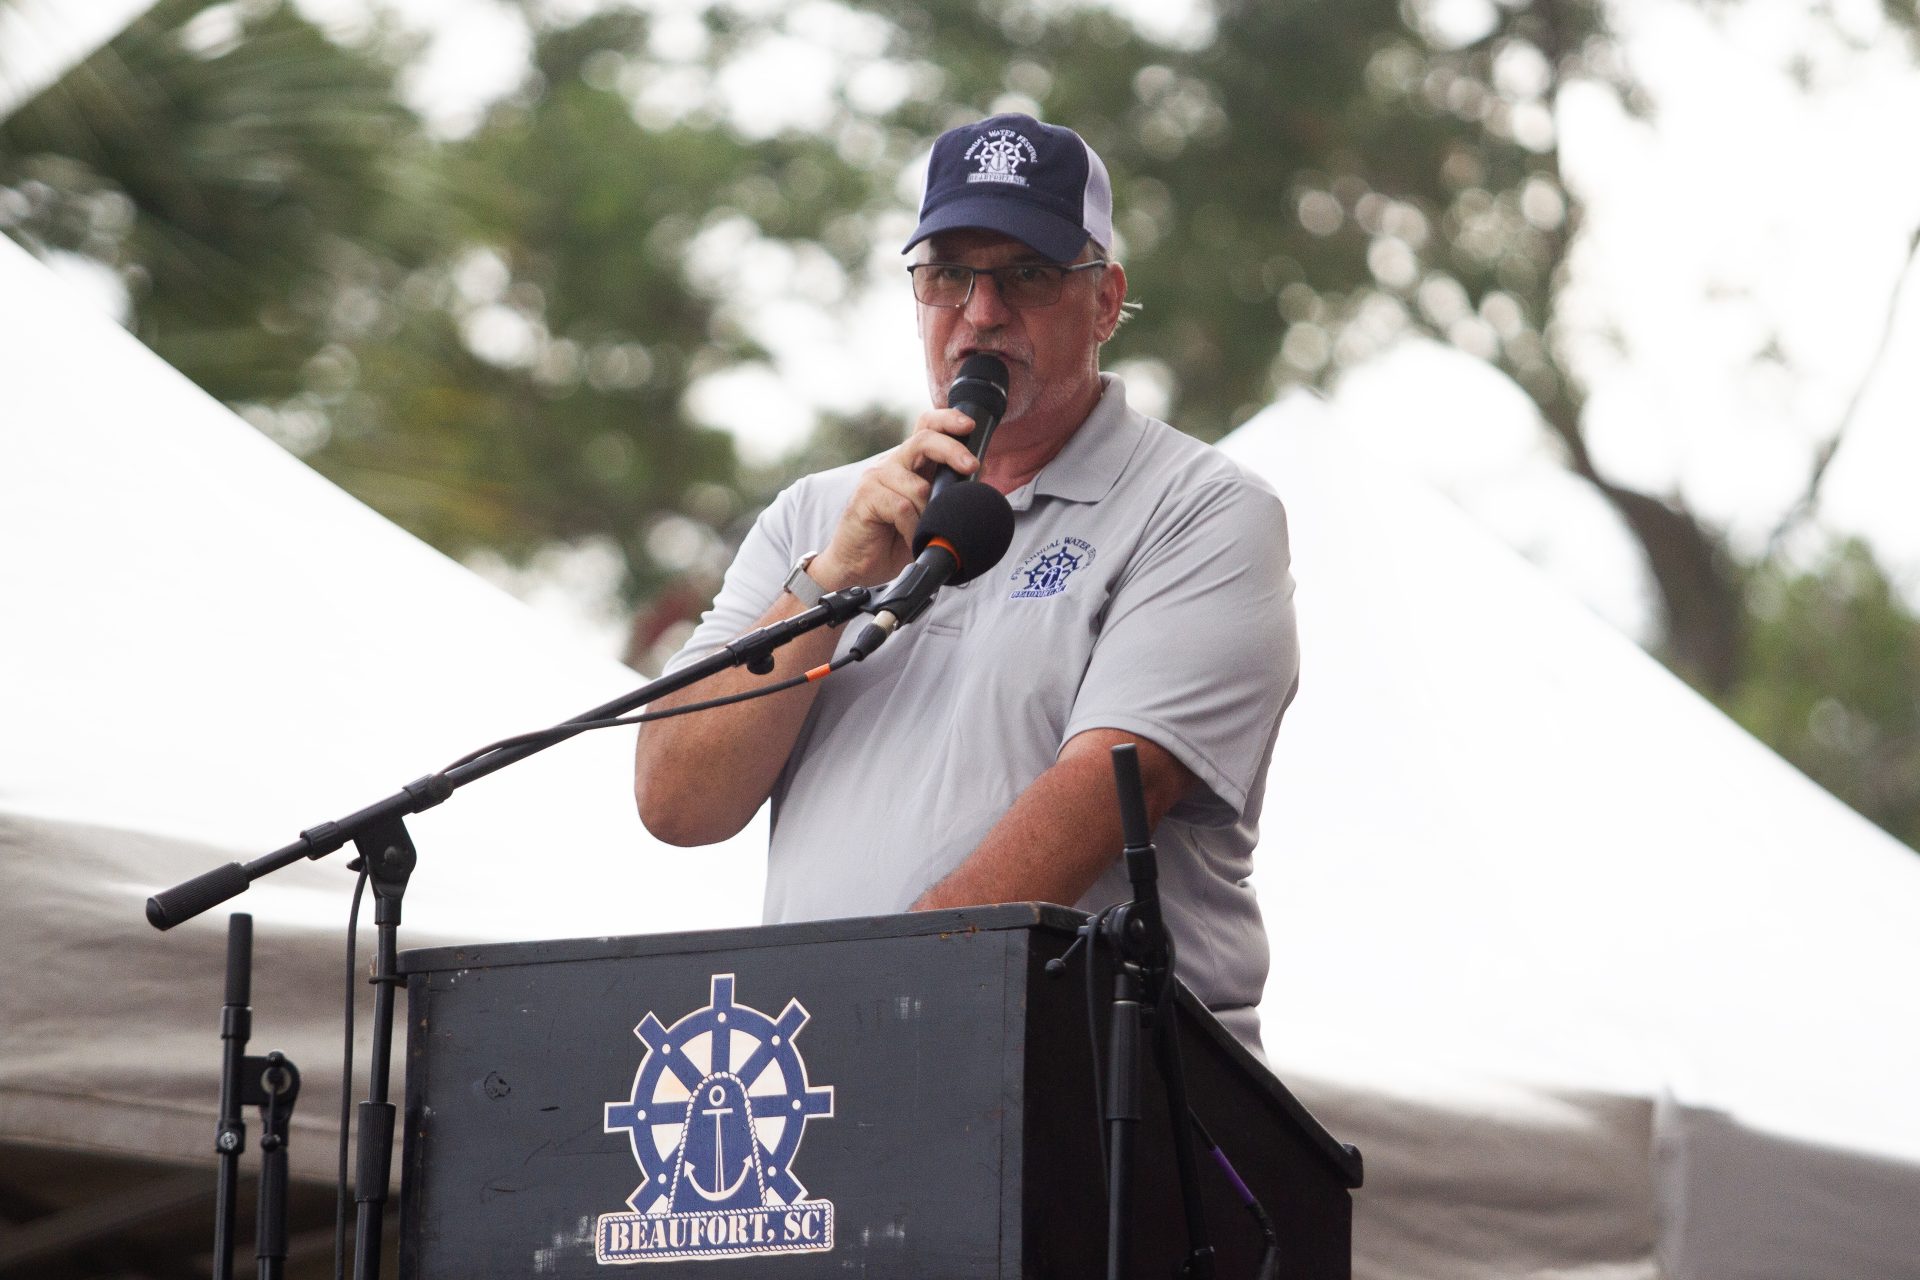 Photos from the 67th annual Beaufort Water Festival’s Opening Ceremony held Friday, July 14, 2023, at Henry C. Chambers Waterfront Park. All photos by Delayna Earley/The Island News